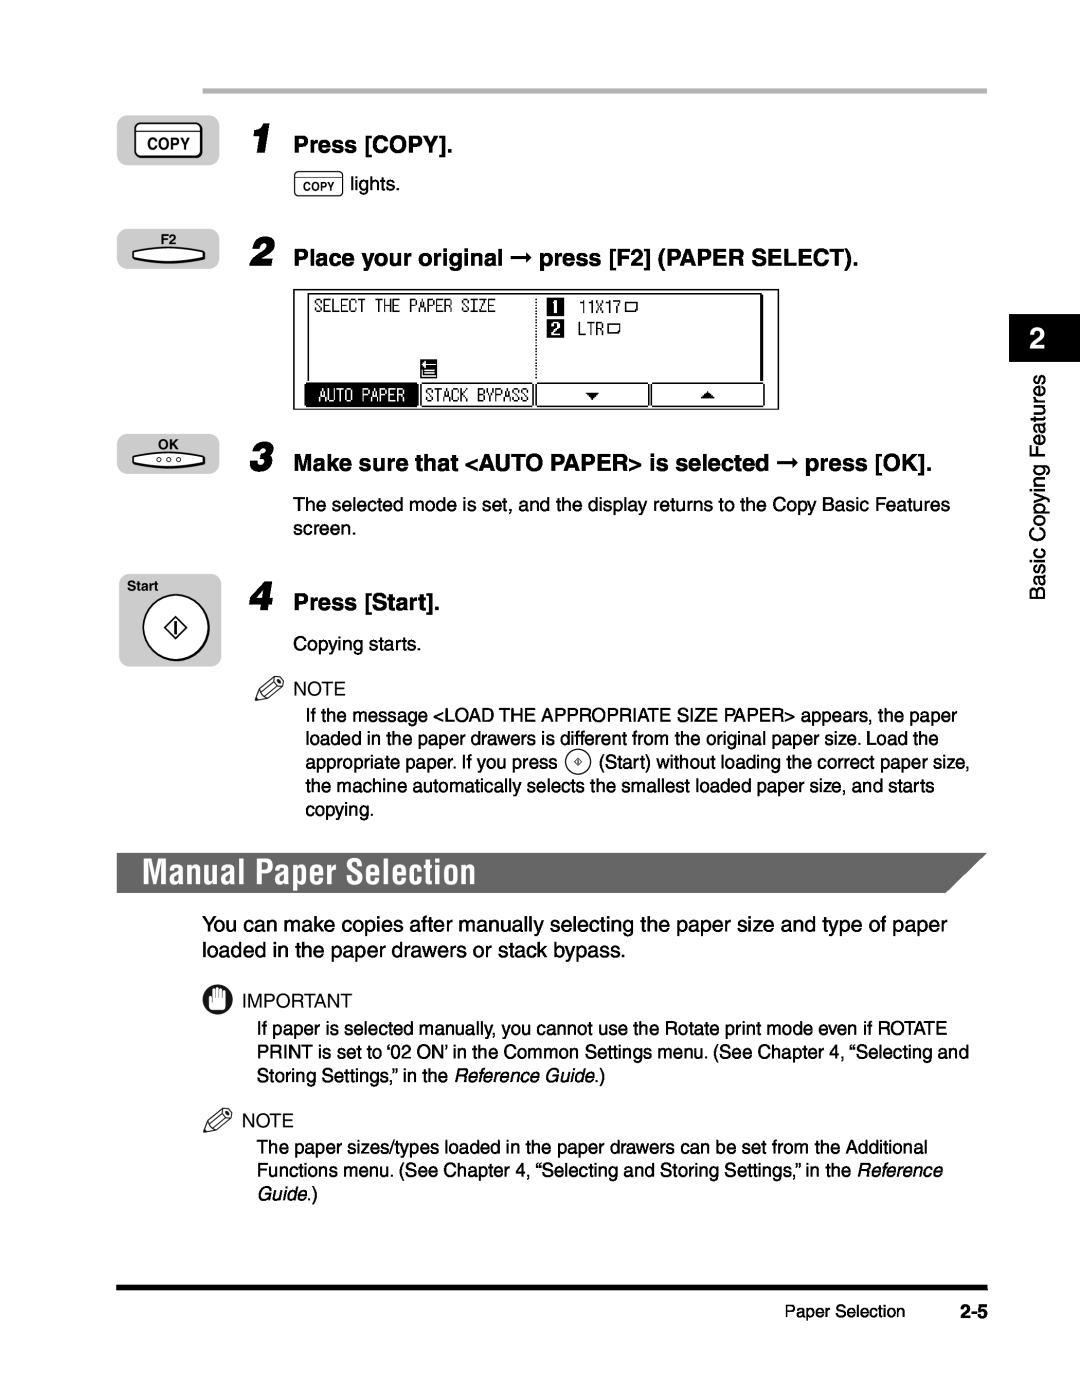 Canon 2010F Manual Paper Selection, Press COPY, Make sure that AUTO PAPER is selected press OK, Press Start, COPY lights 